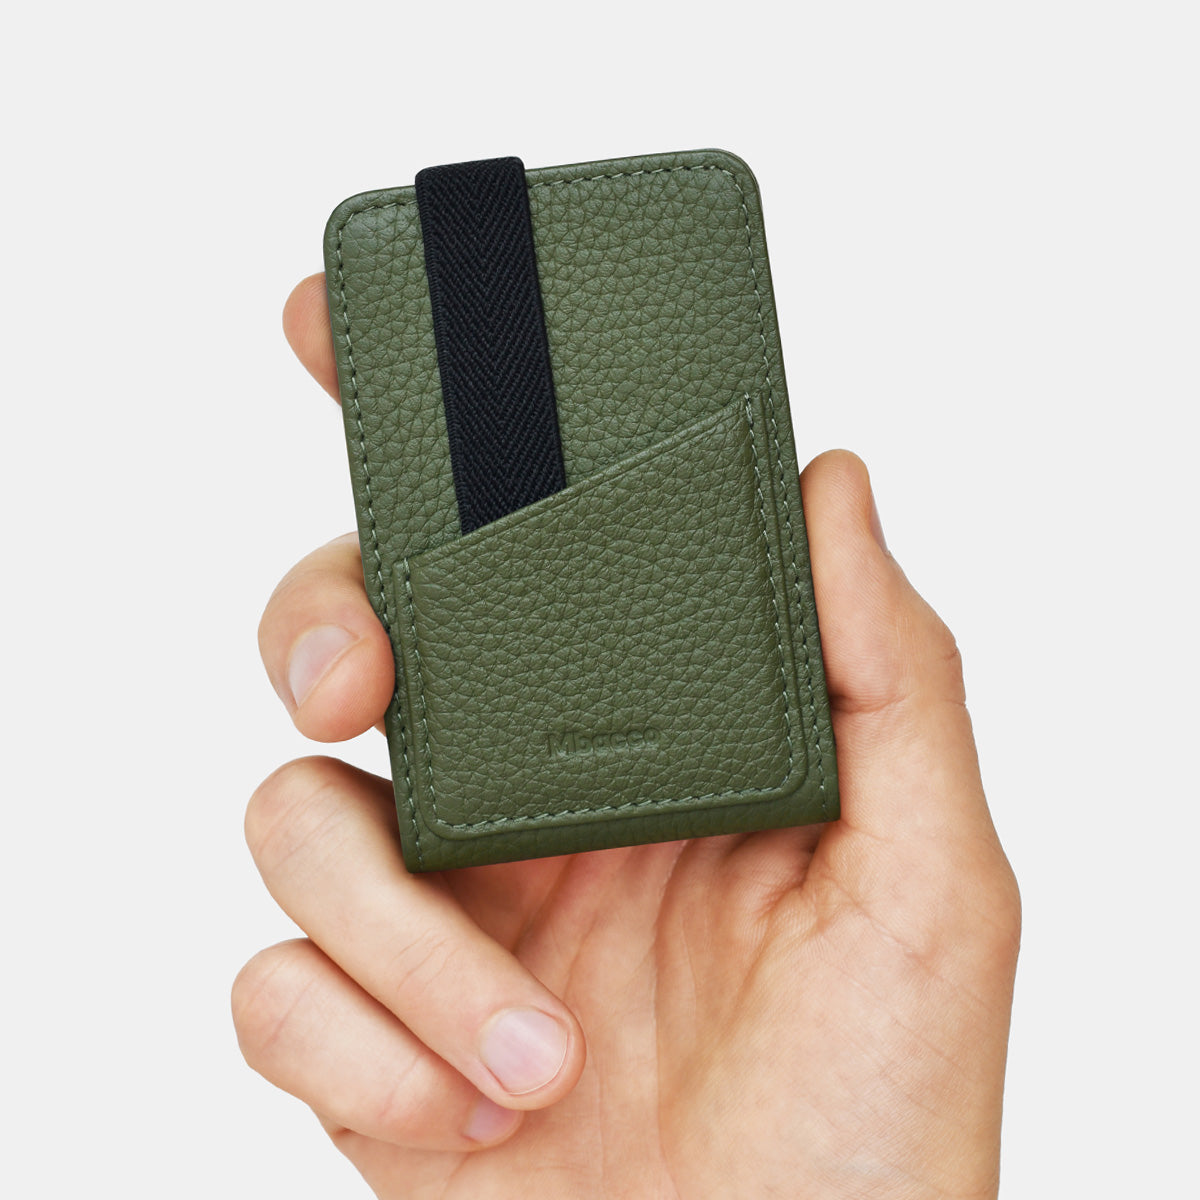 Mbacco™ Wallet